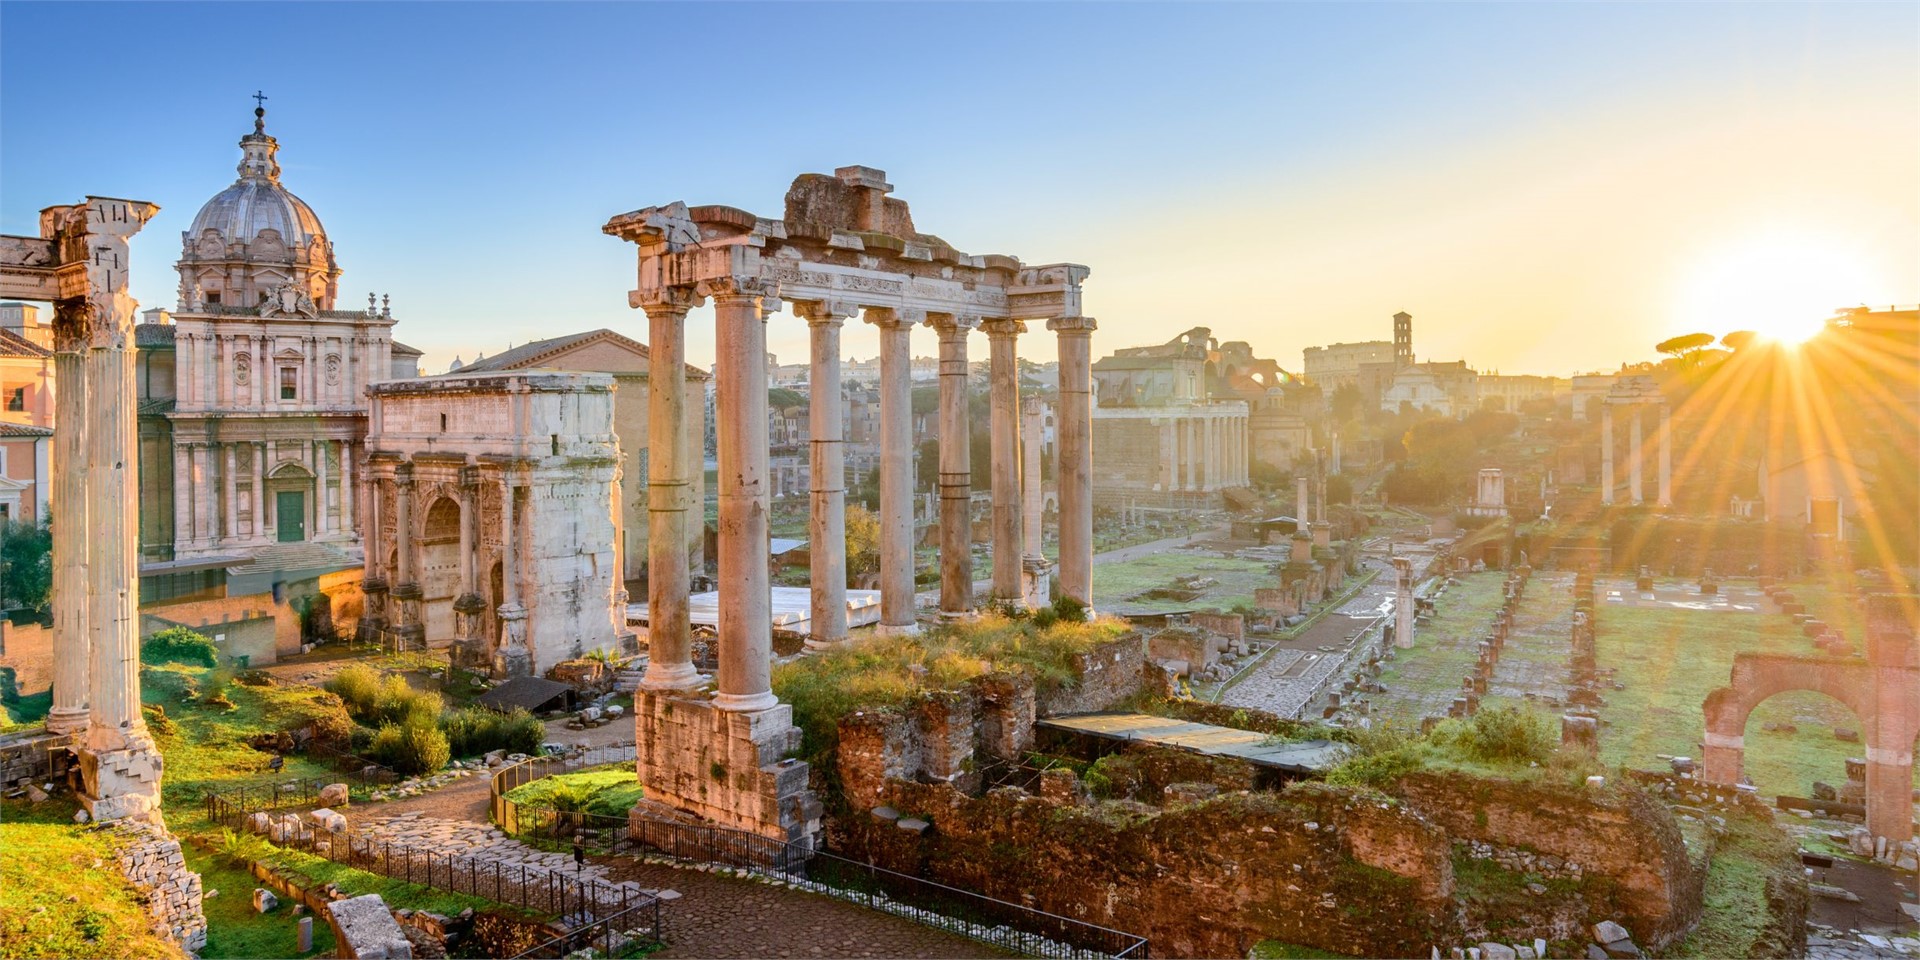 Hotels and accommodation in Rome, Italy
